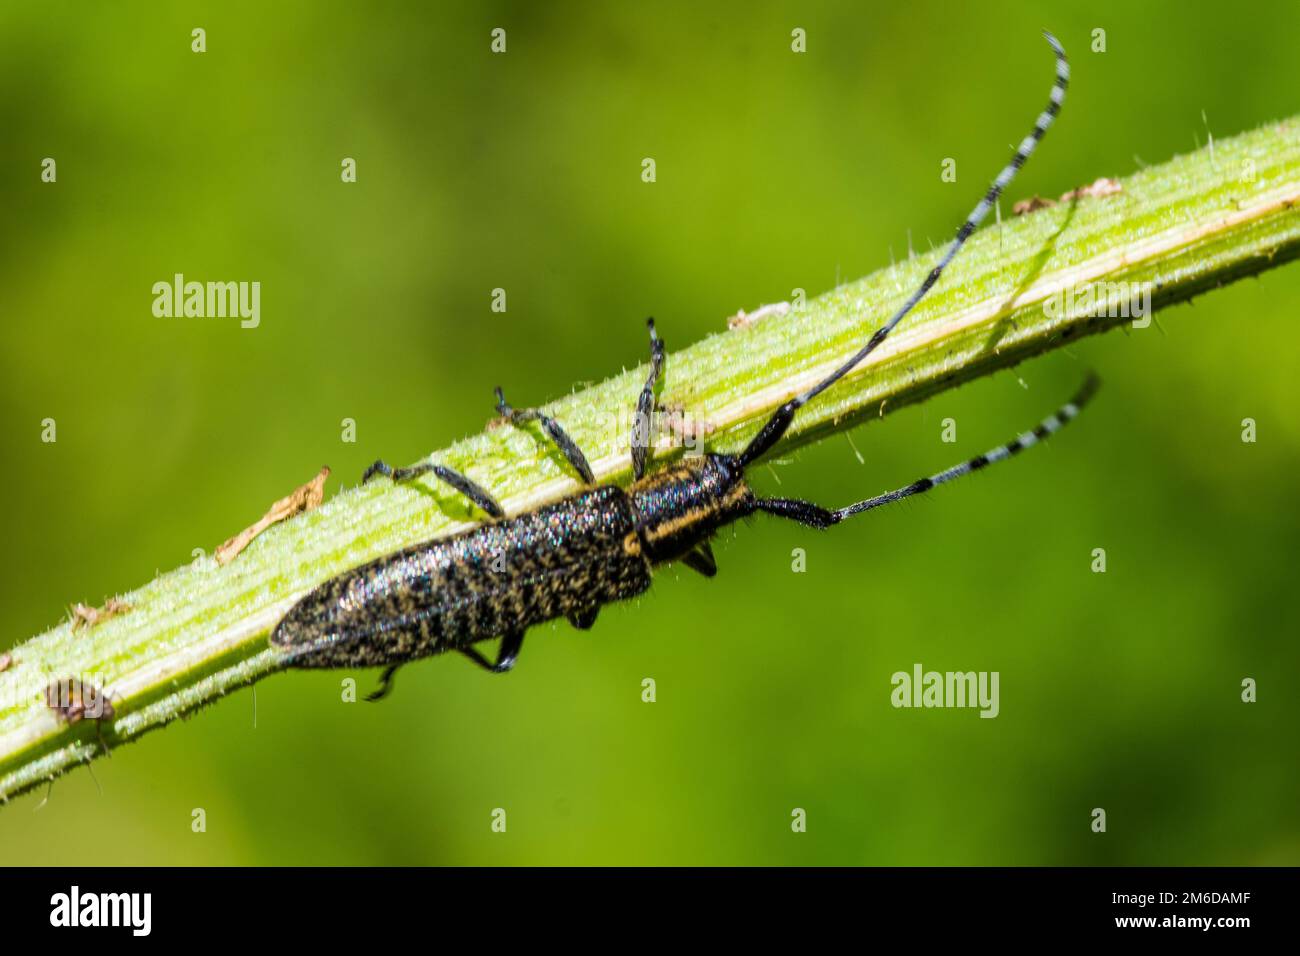 Brown longhorn beetle crawling on plant Stock Photo